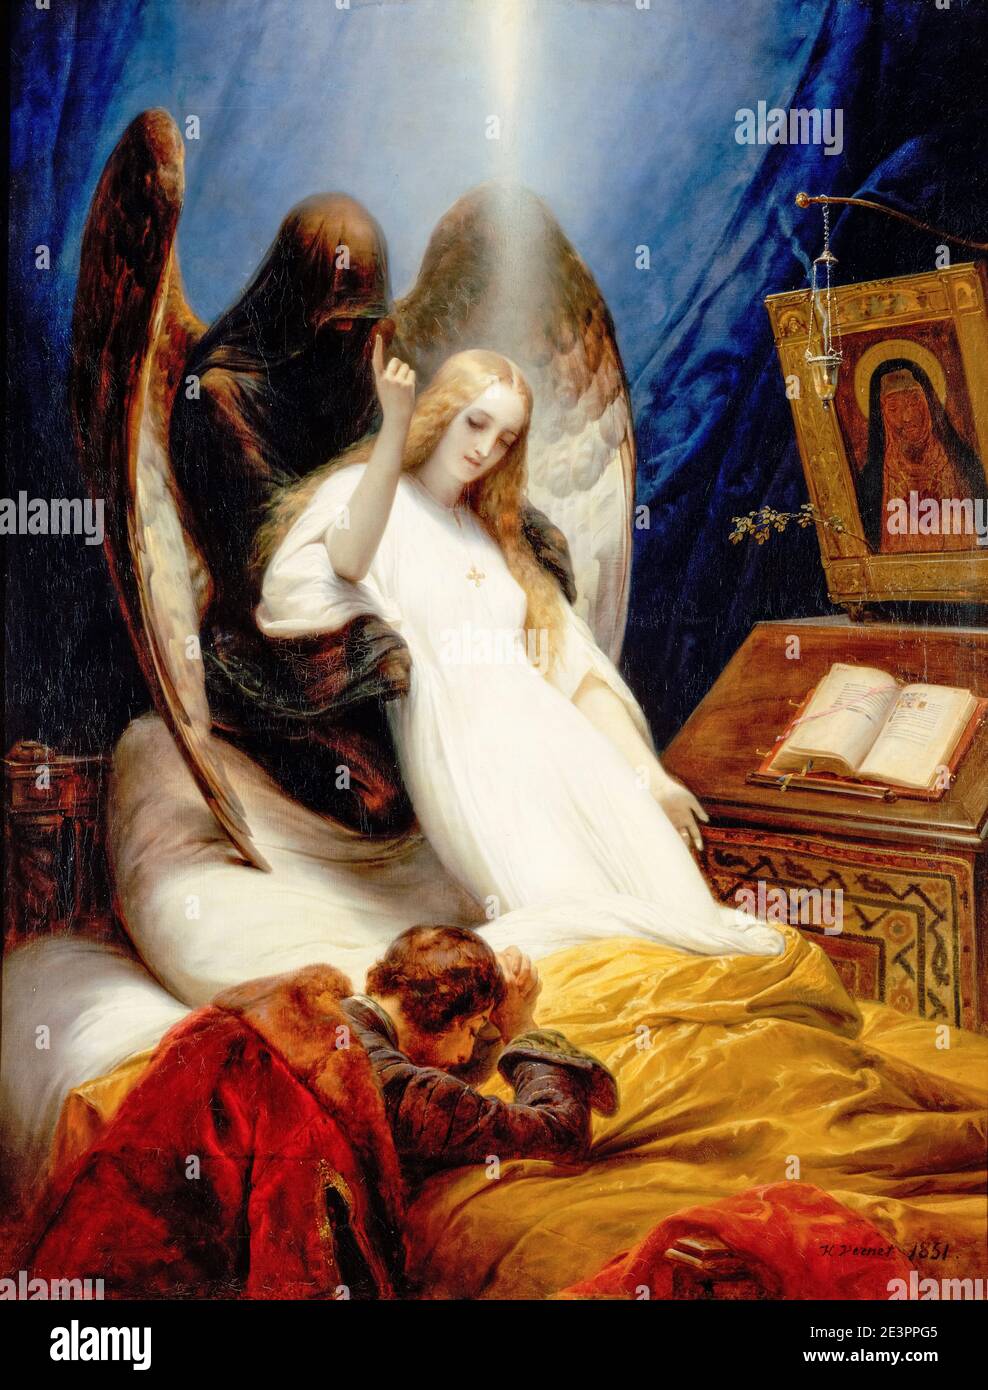 Horace Vernet, The Angel of Death, painting, 1851 Stock Photo